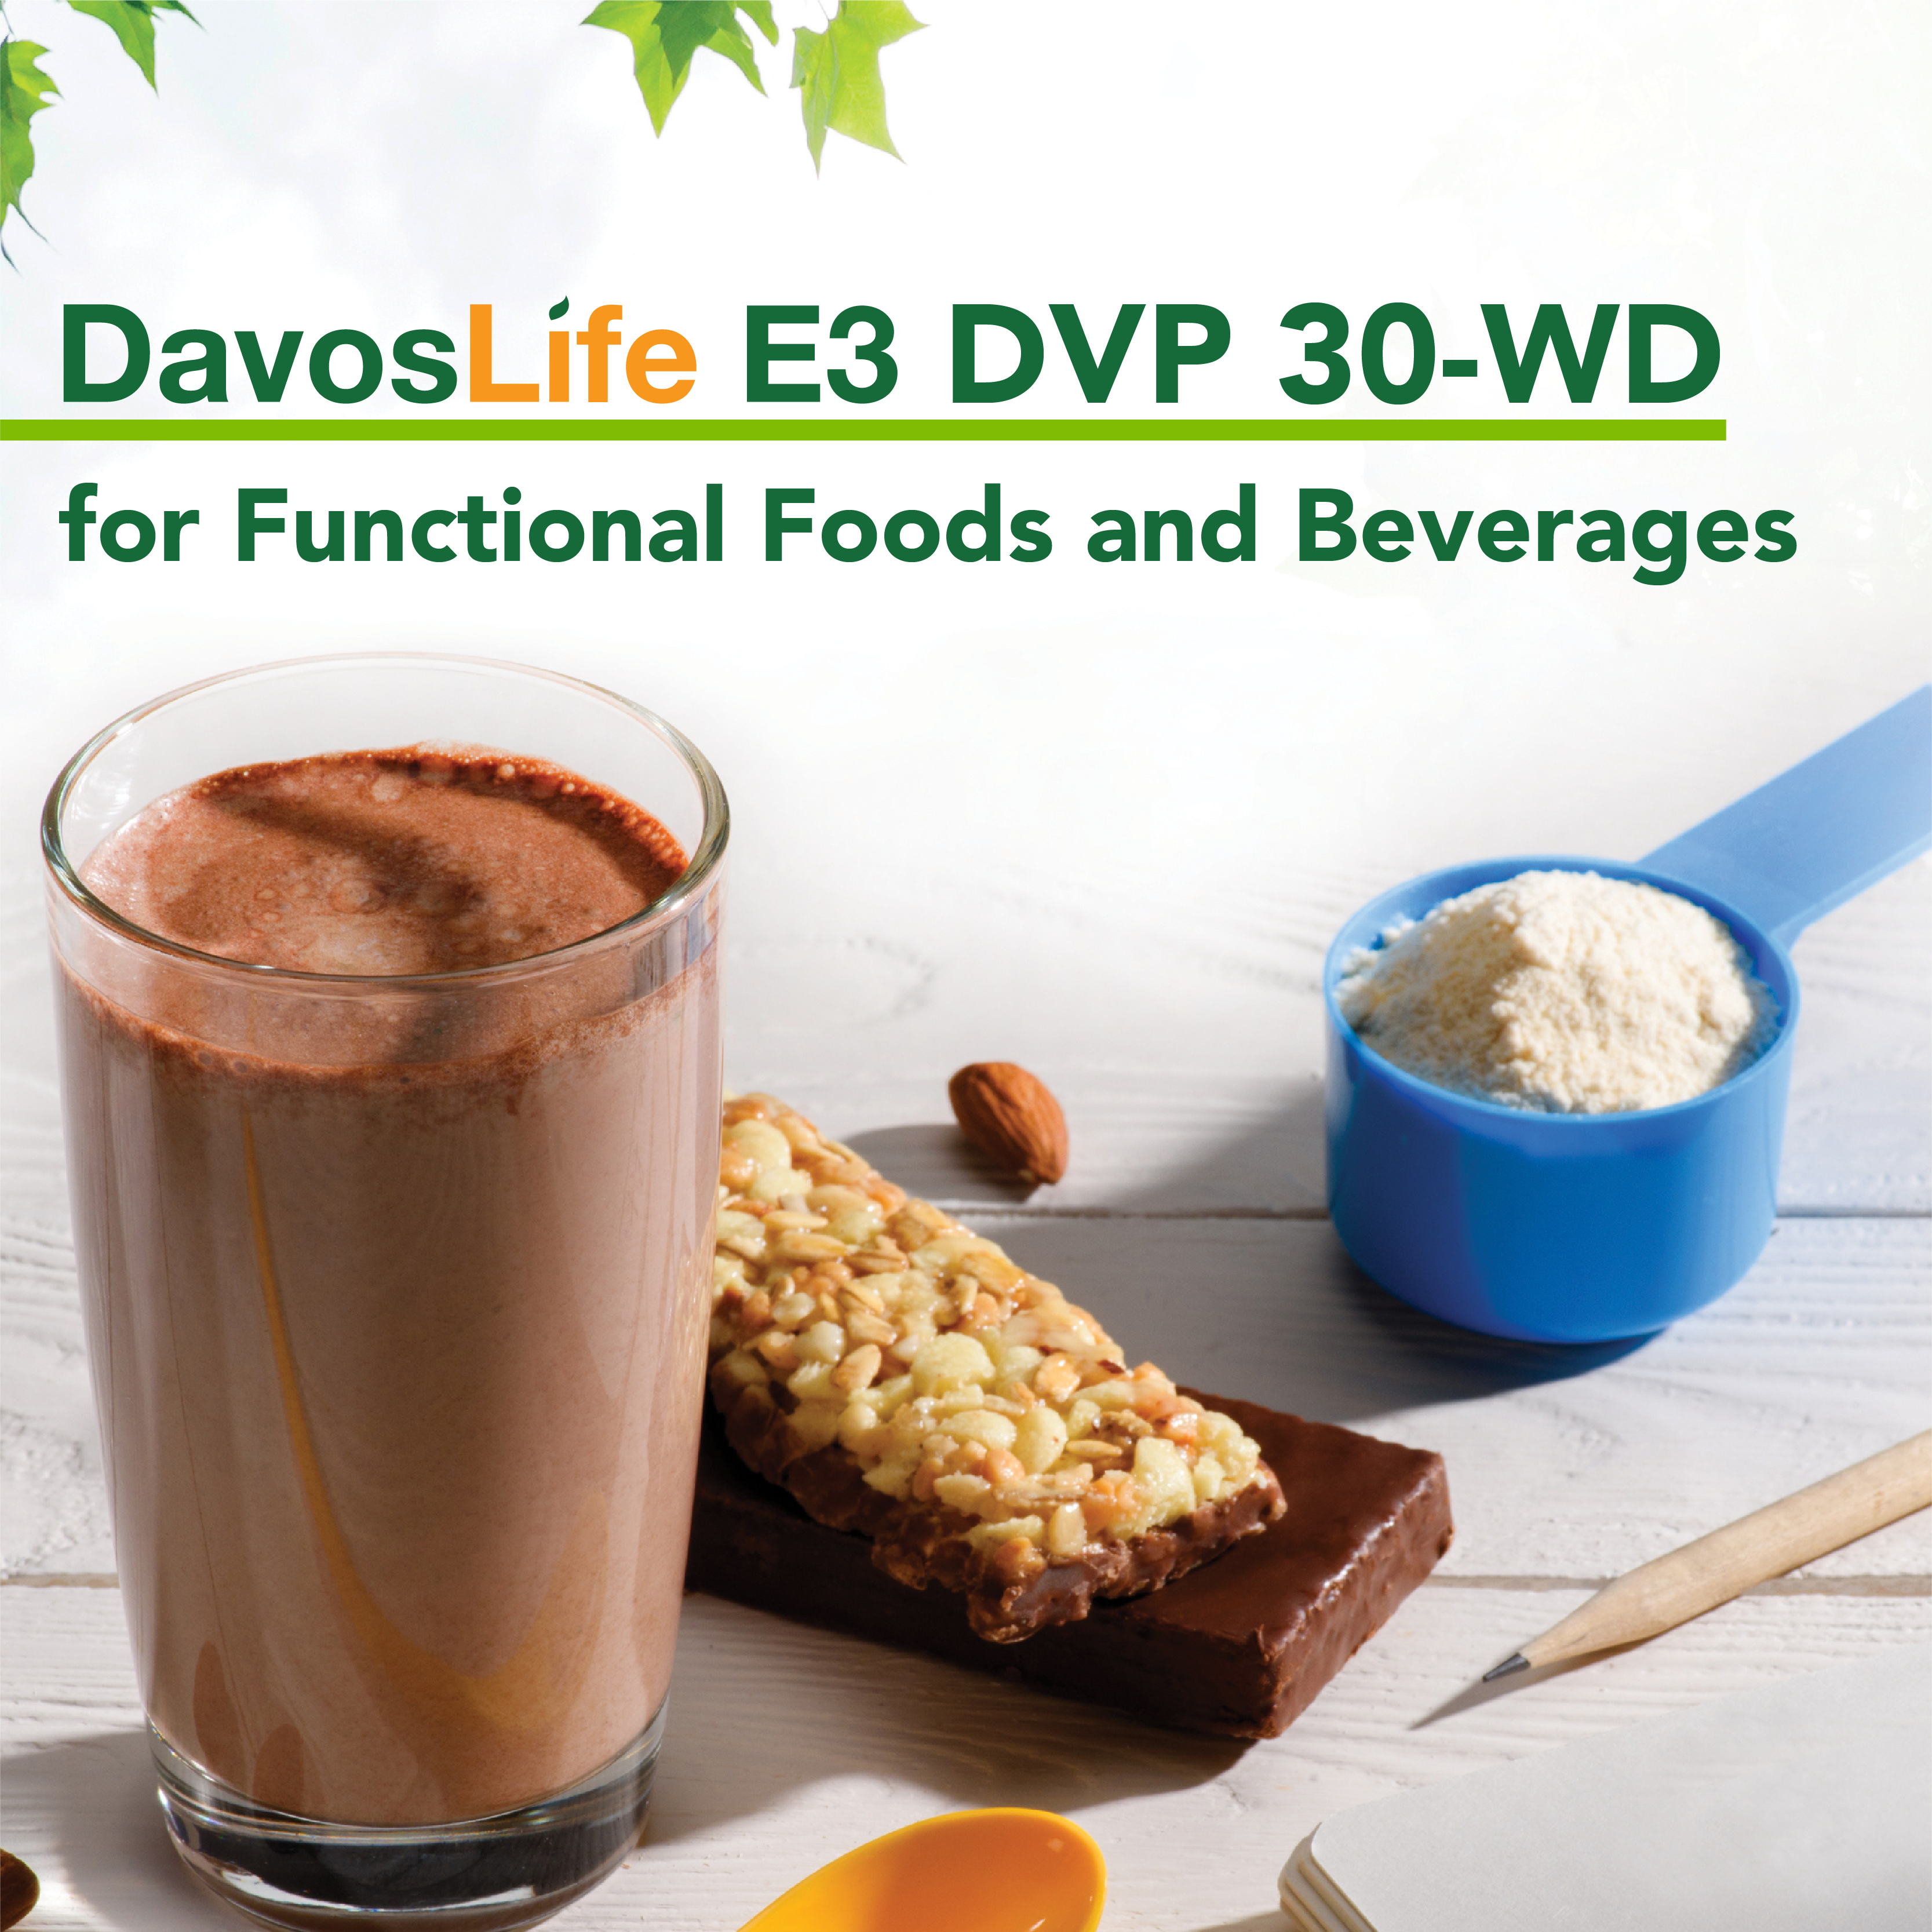 DavosLife E3 DVP 30-WD for Functional Foods and Beverages